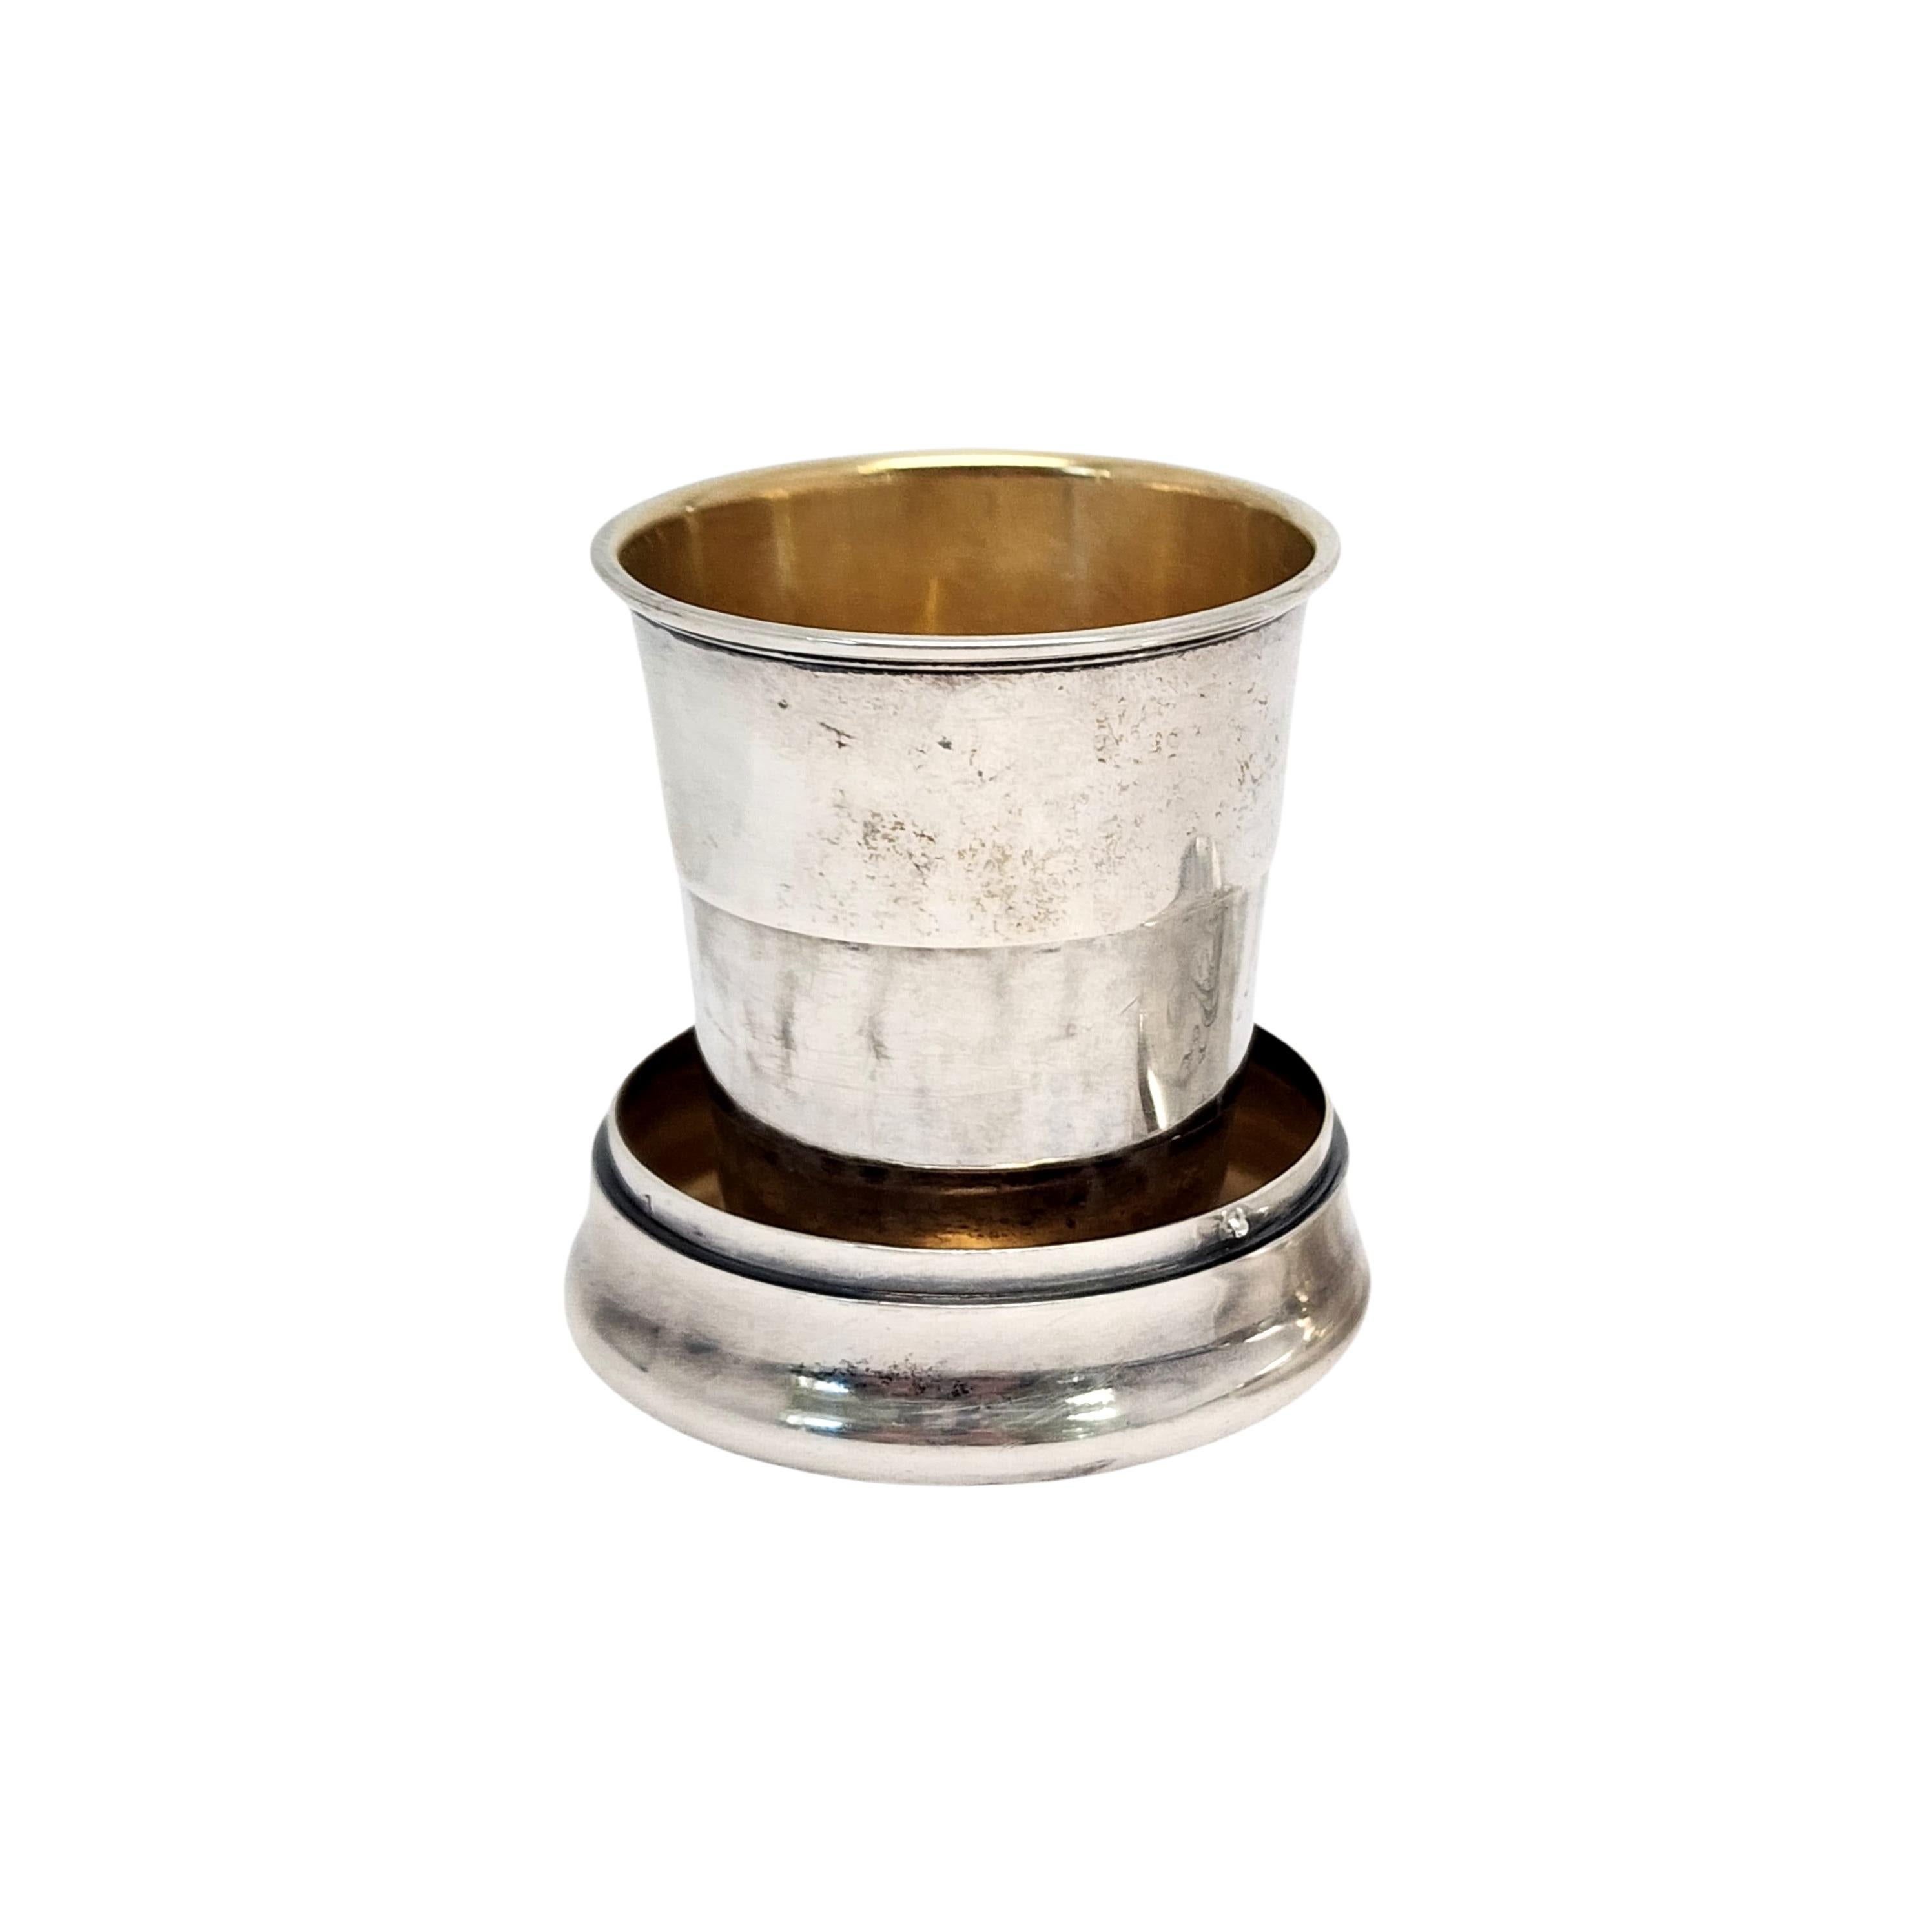 George Shiebler Sterling Silver Collapsible Travel Cup Gold Wash Interior For Sale 5